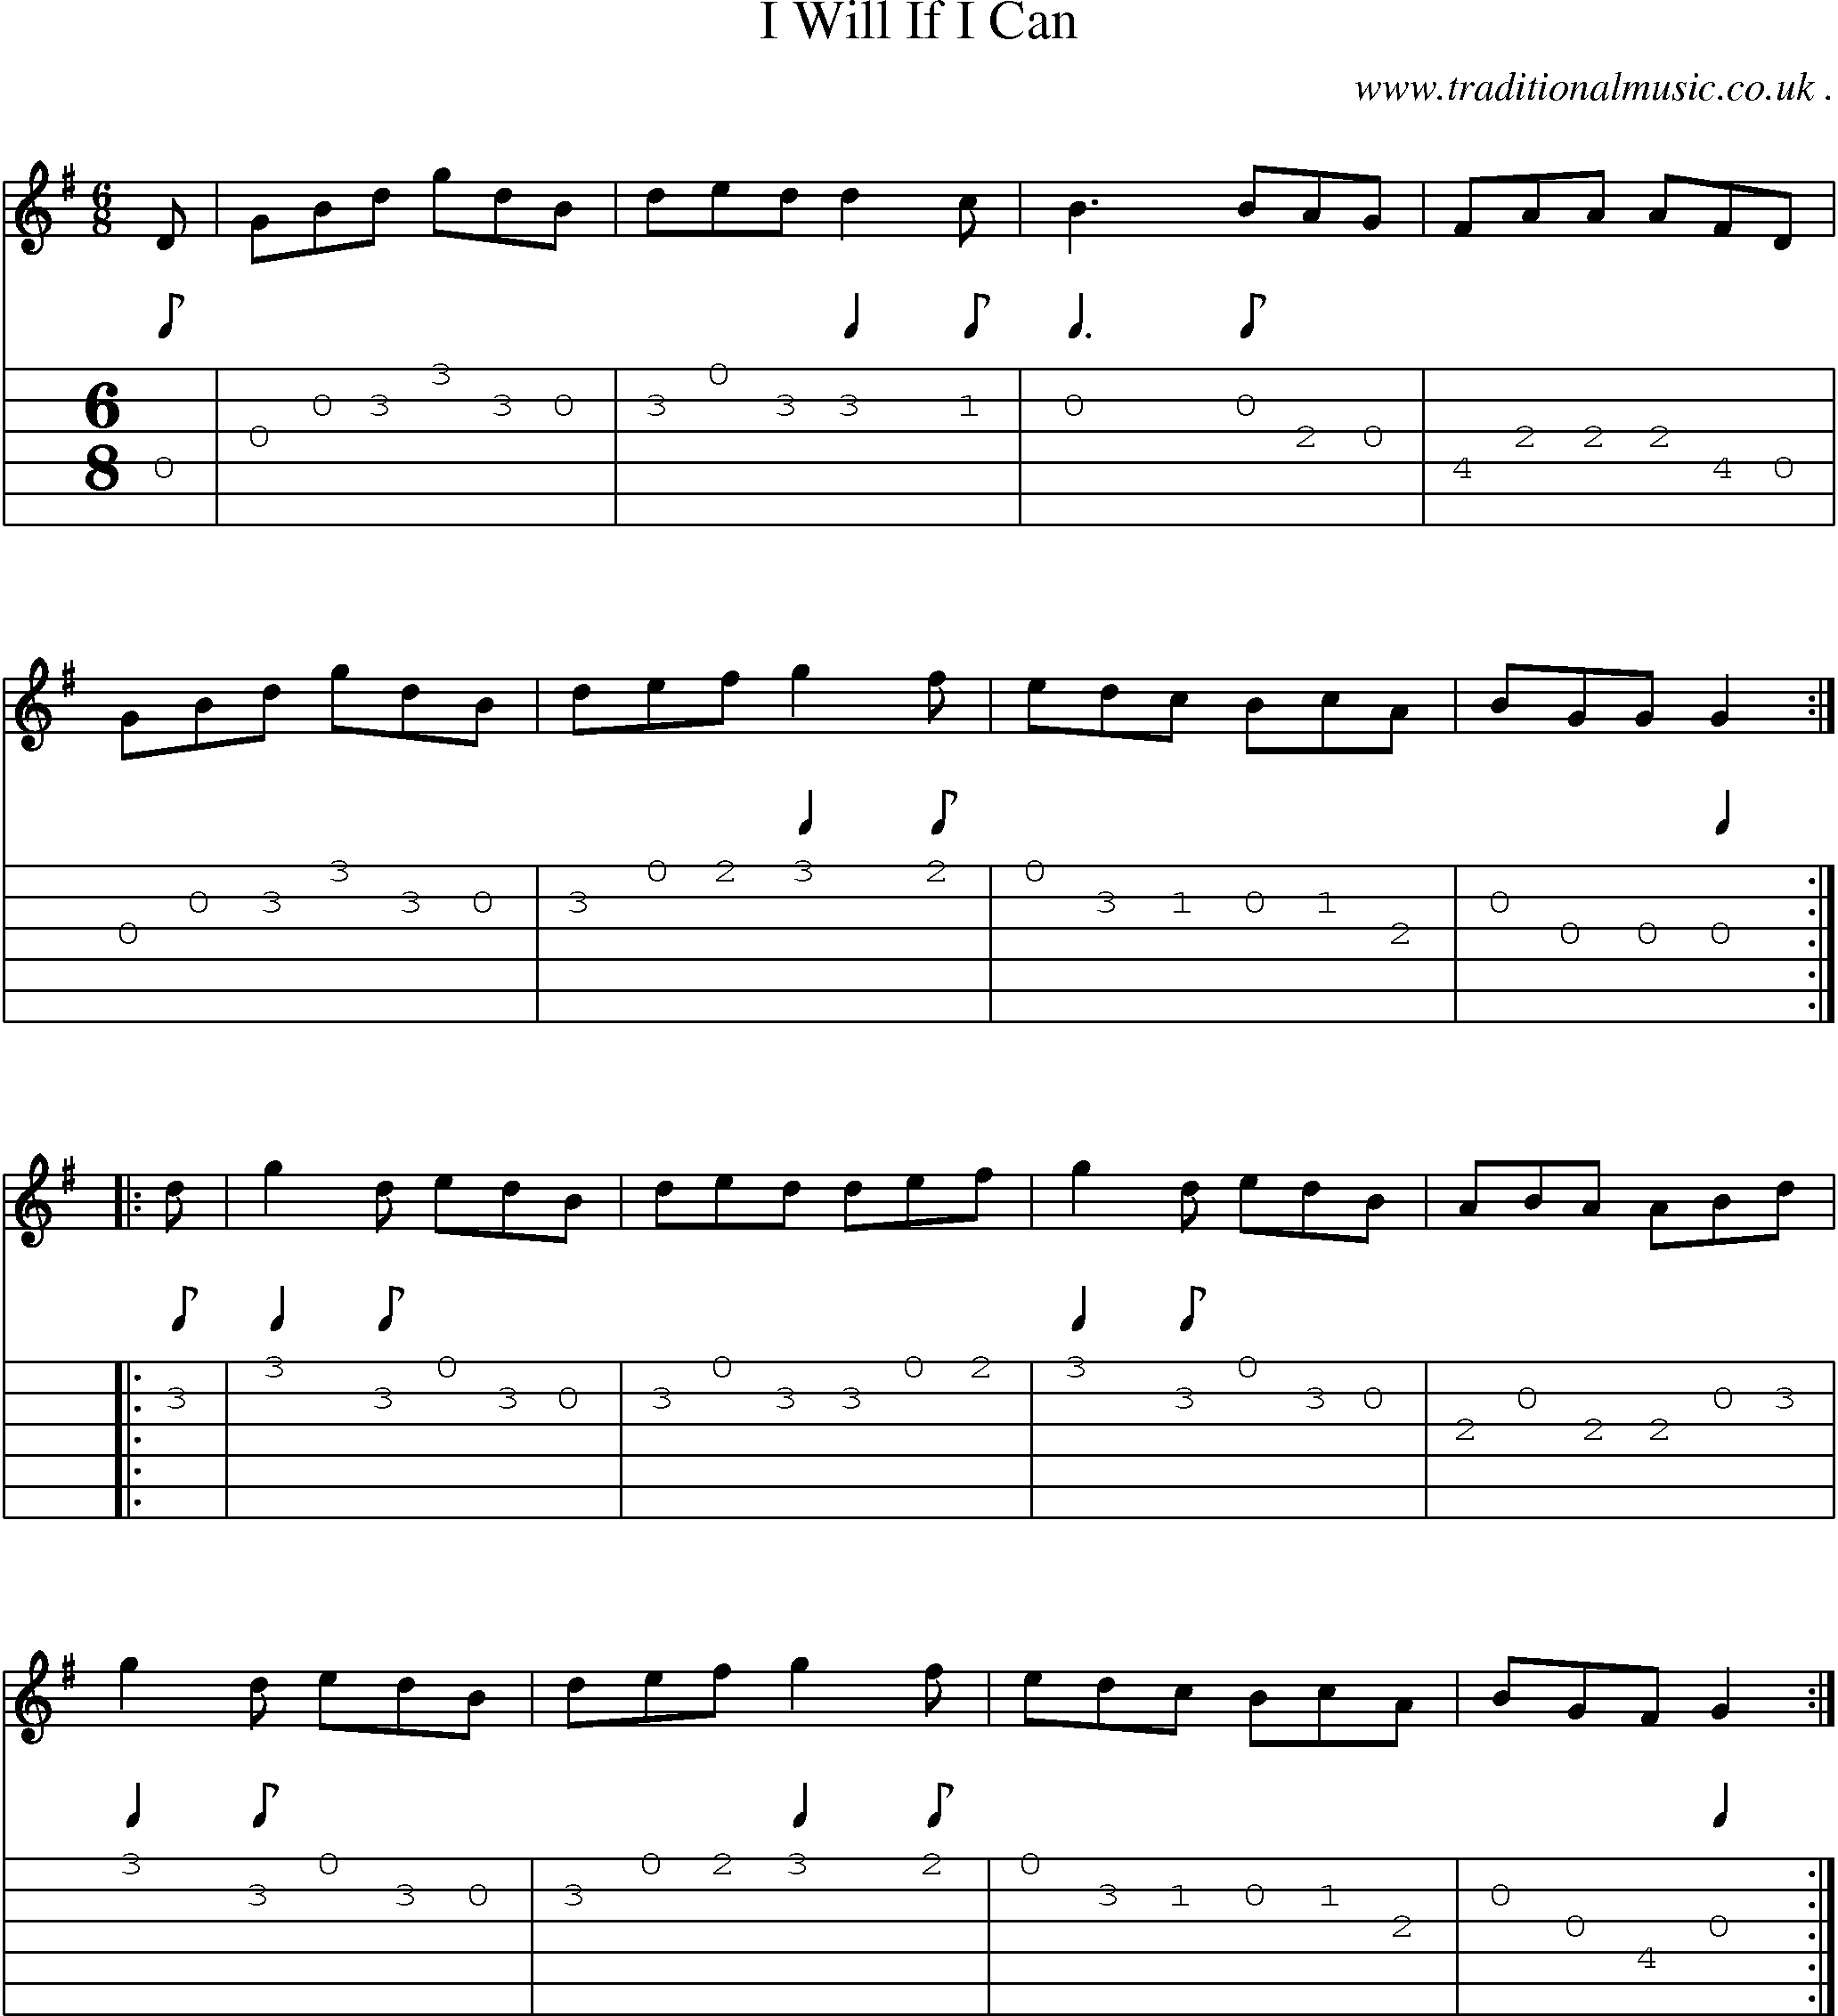 Sheet-Music and Guitar Tabs for I Will If I Can